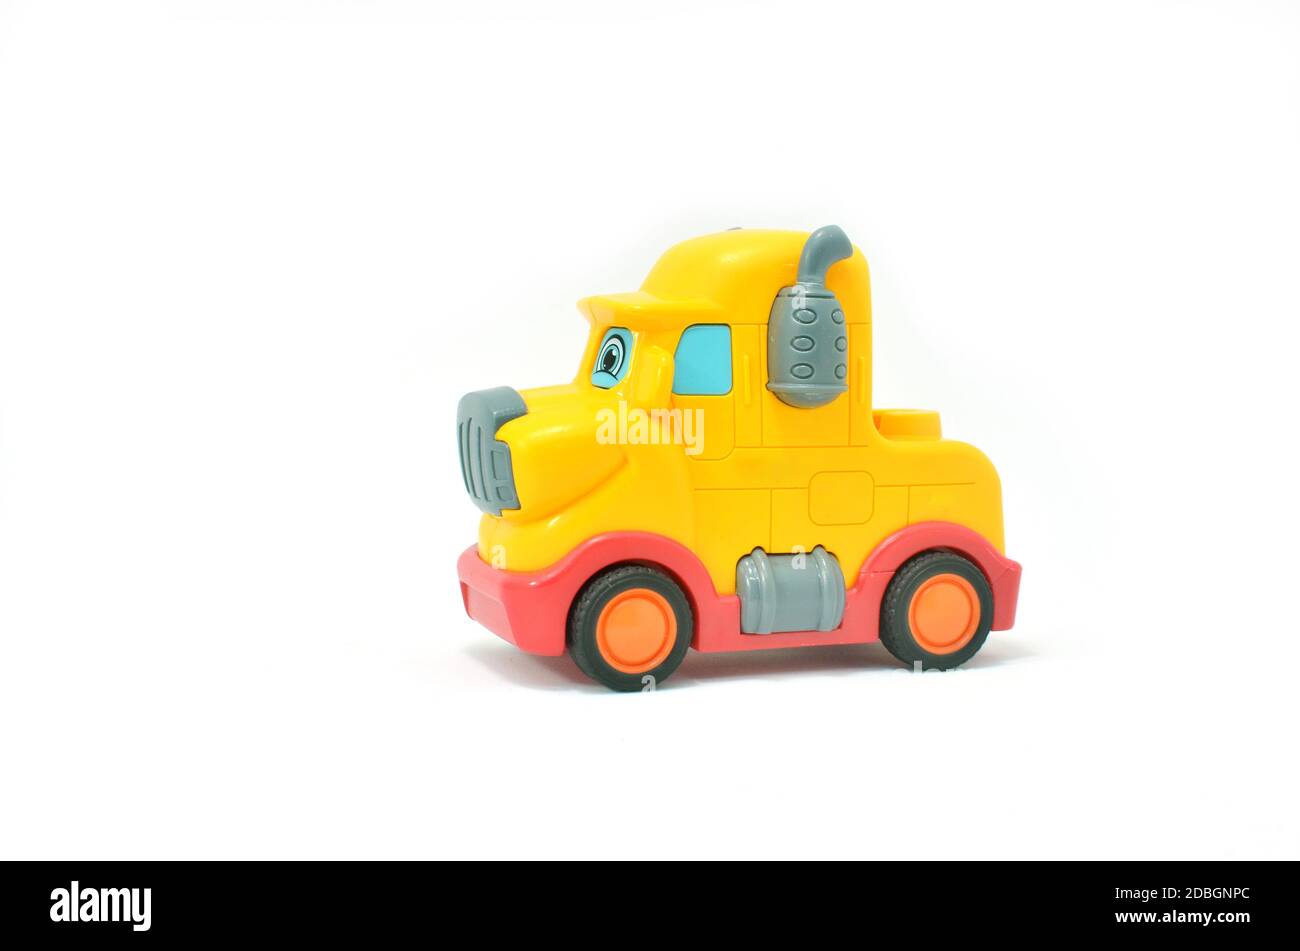 Toy car truck, isolated in white background Stock Photo